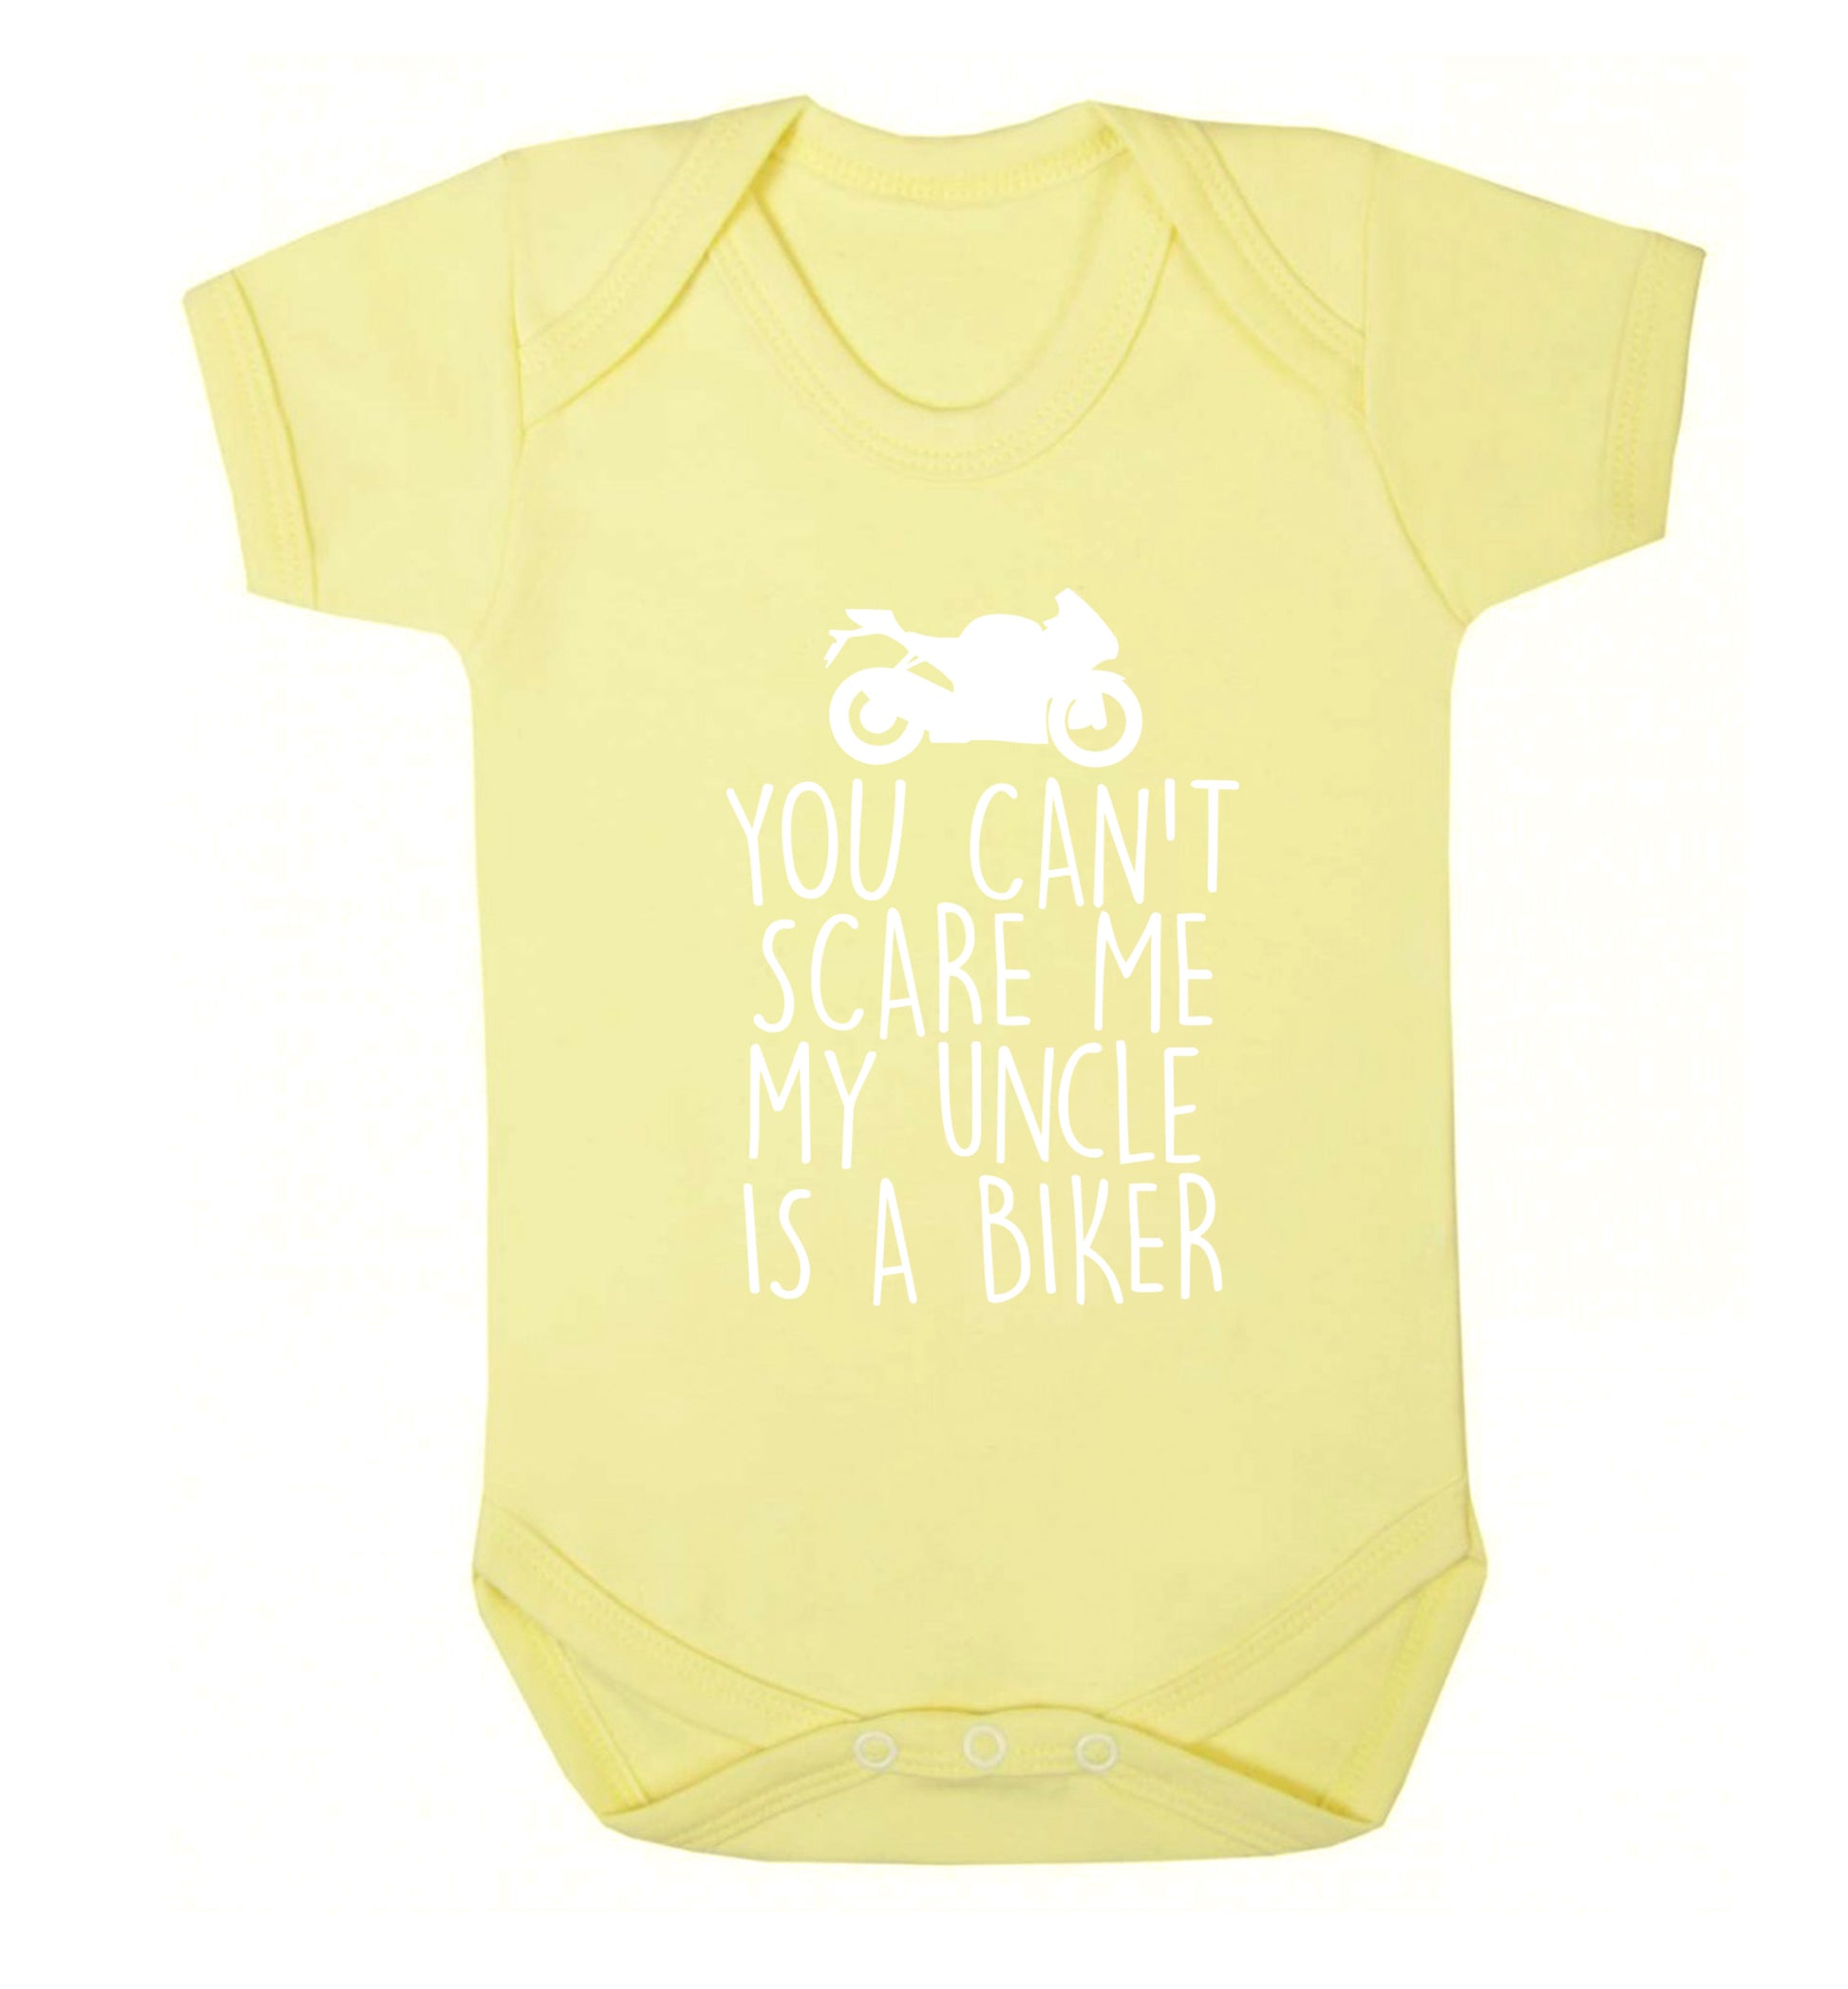 You can't scare me my uncle is a biker Baby Vest pale yellow 18-24 months